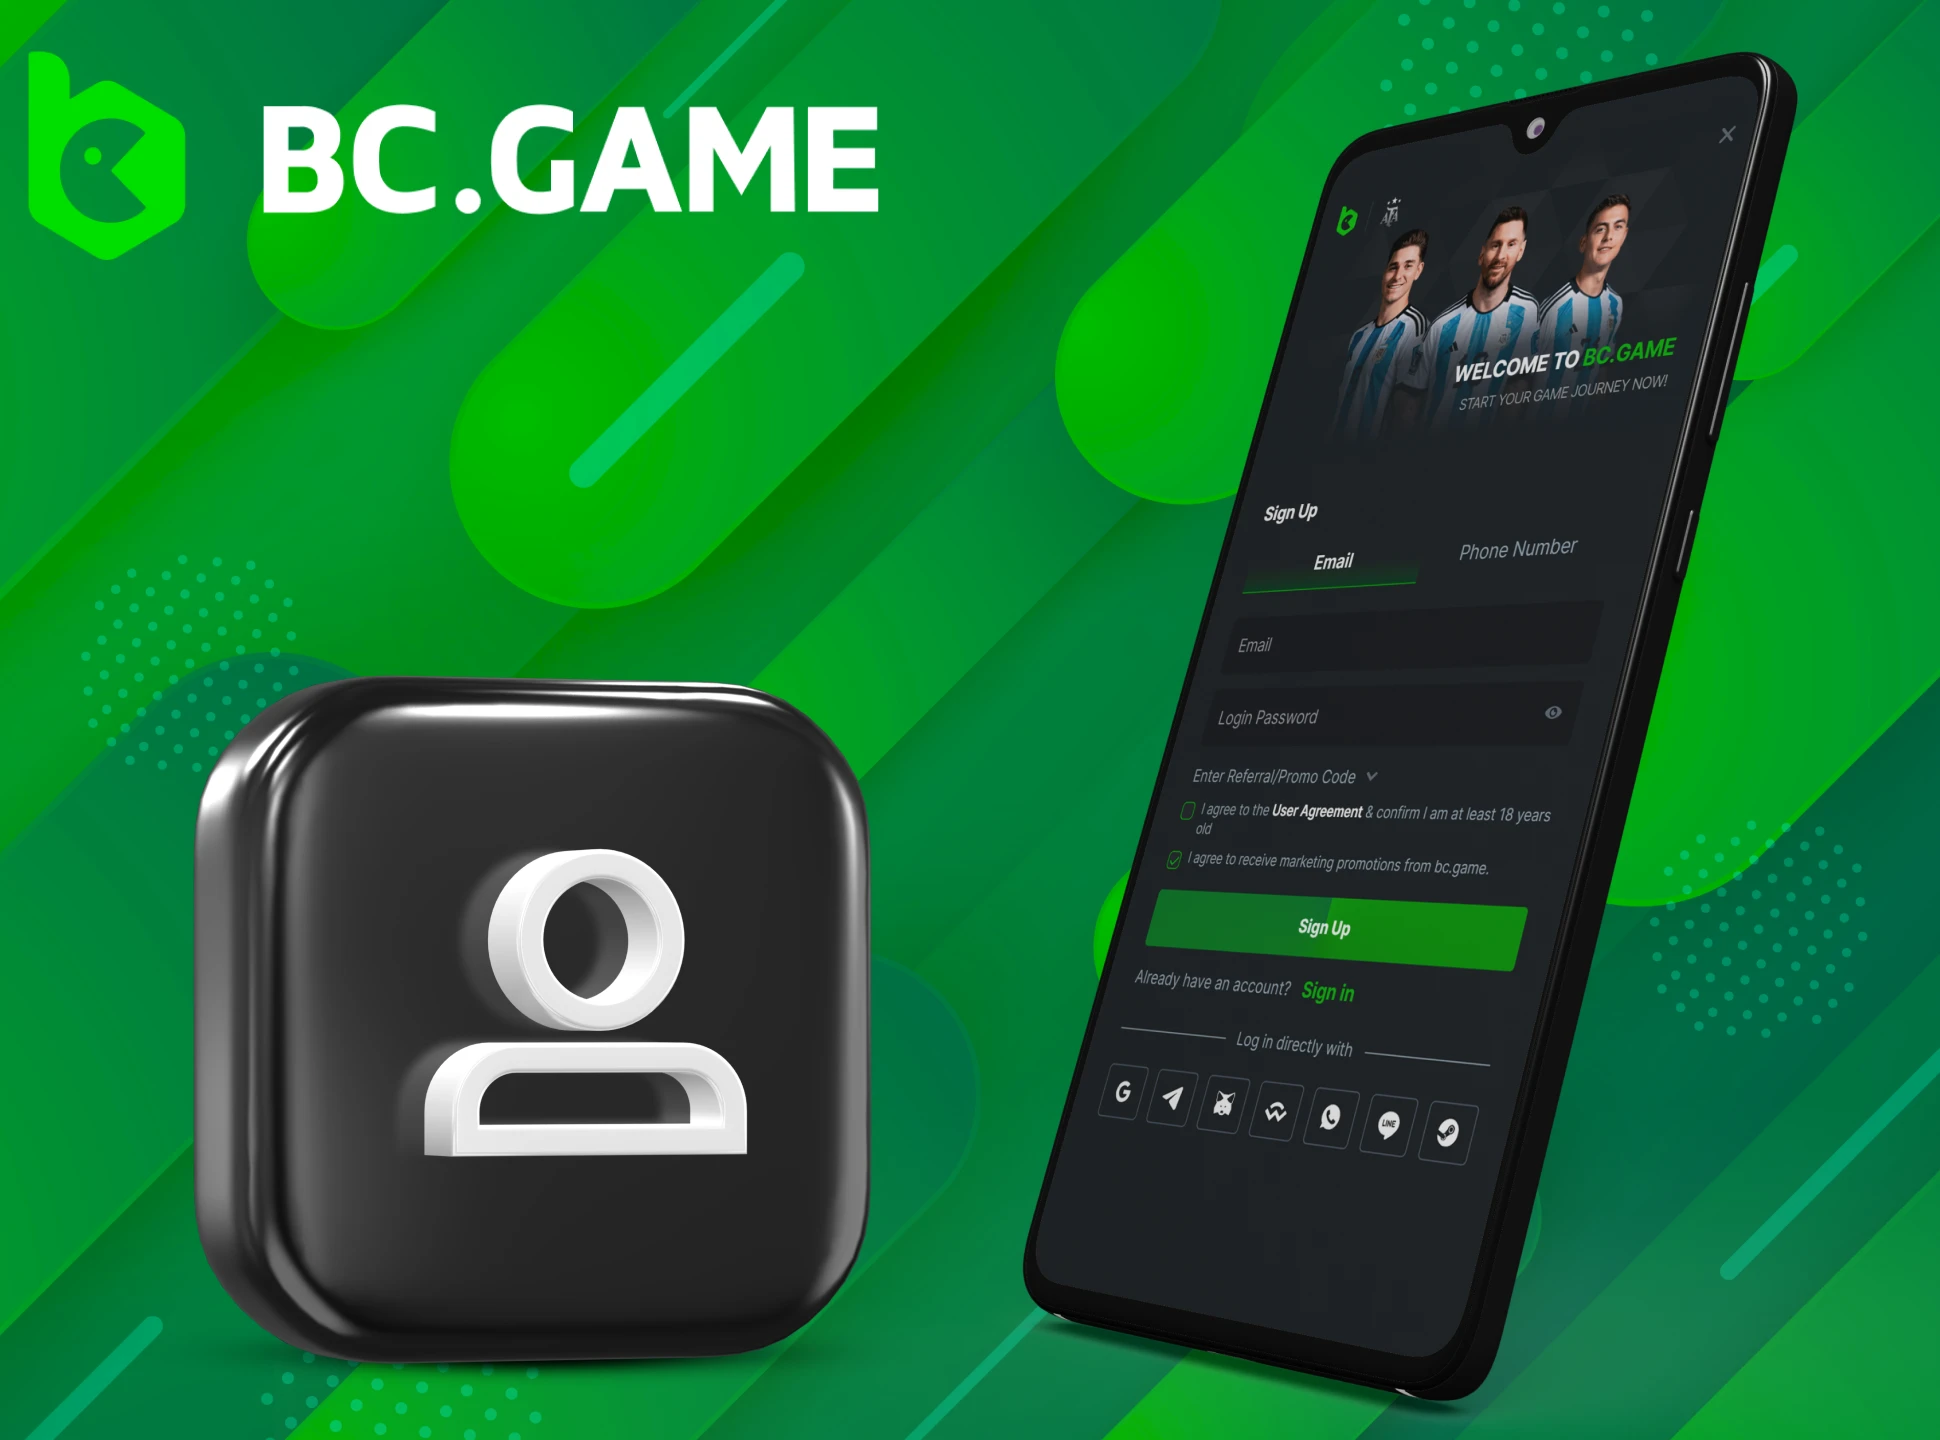 Register directly from the BC Game mobile app.